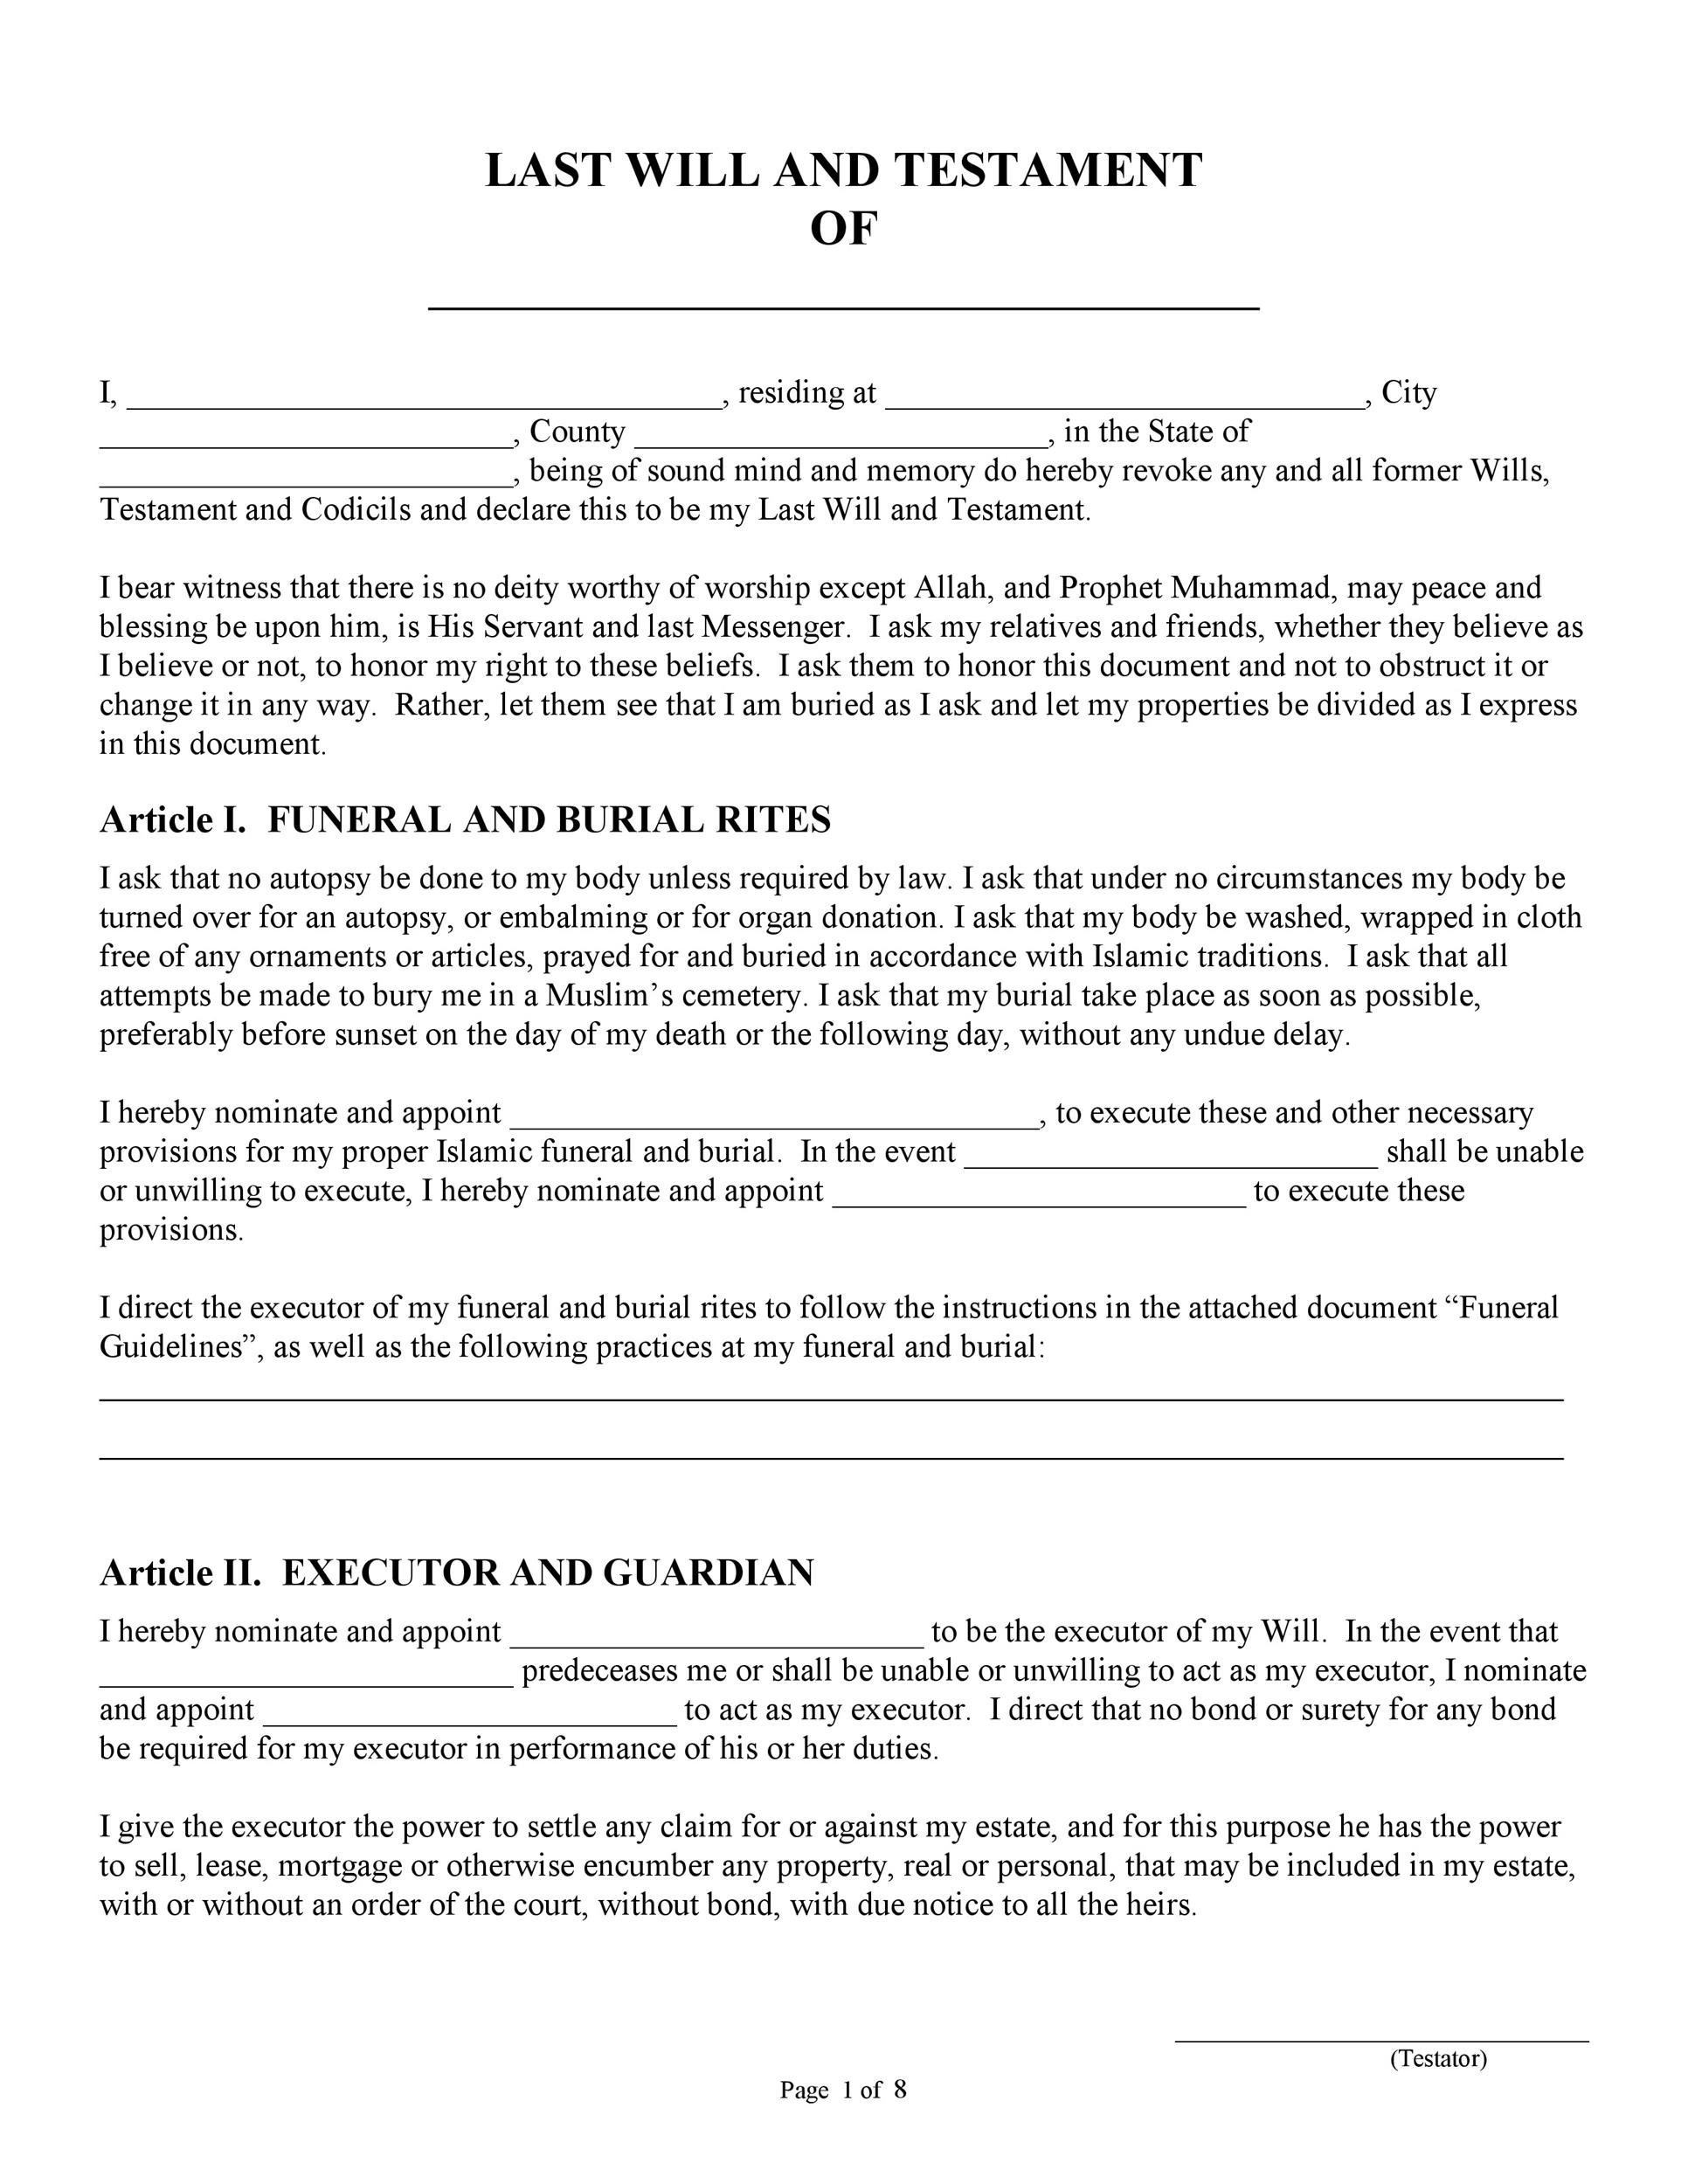 39 Last Will And Testament Forms &amp;amp; Templates ᐅ Templatelab - Free Printable Will Forms Uk